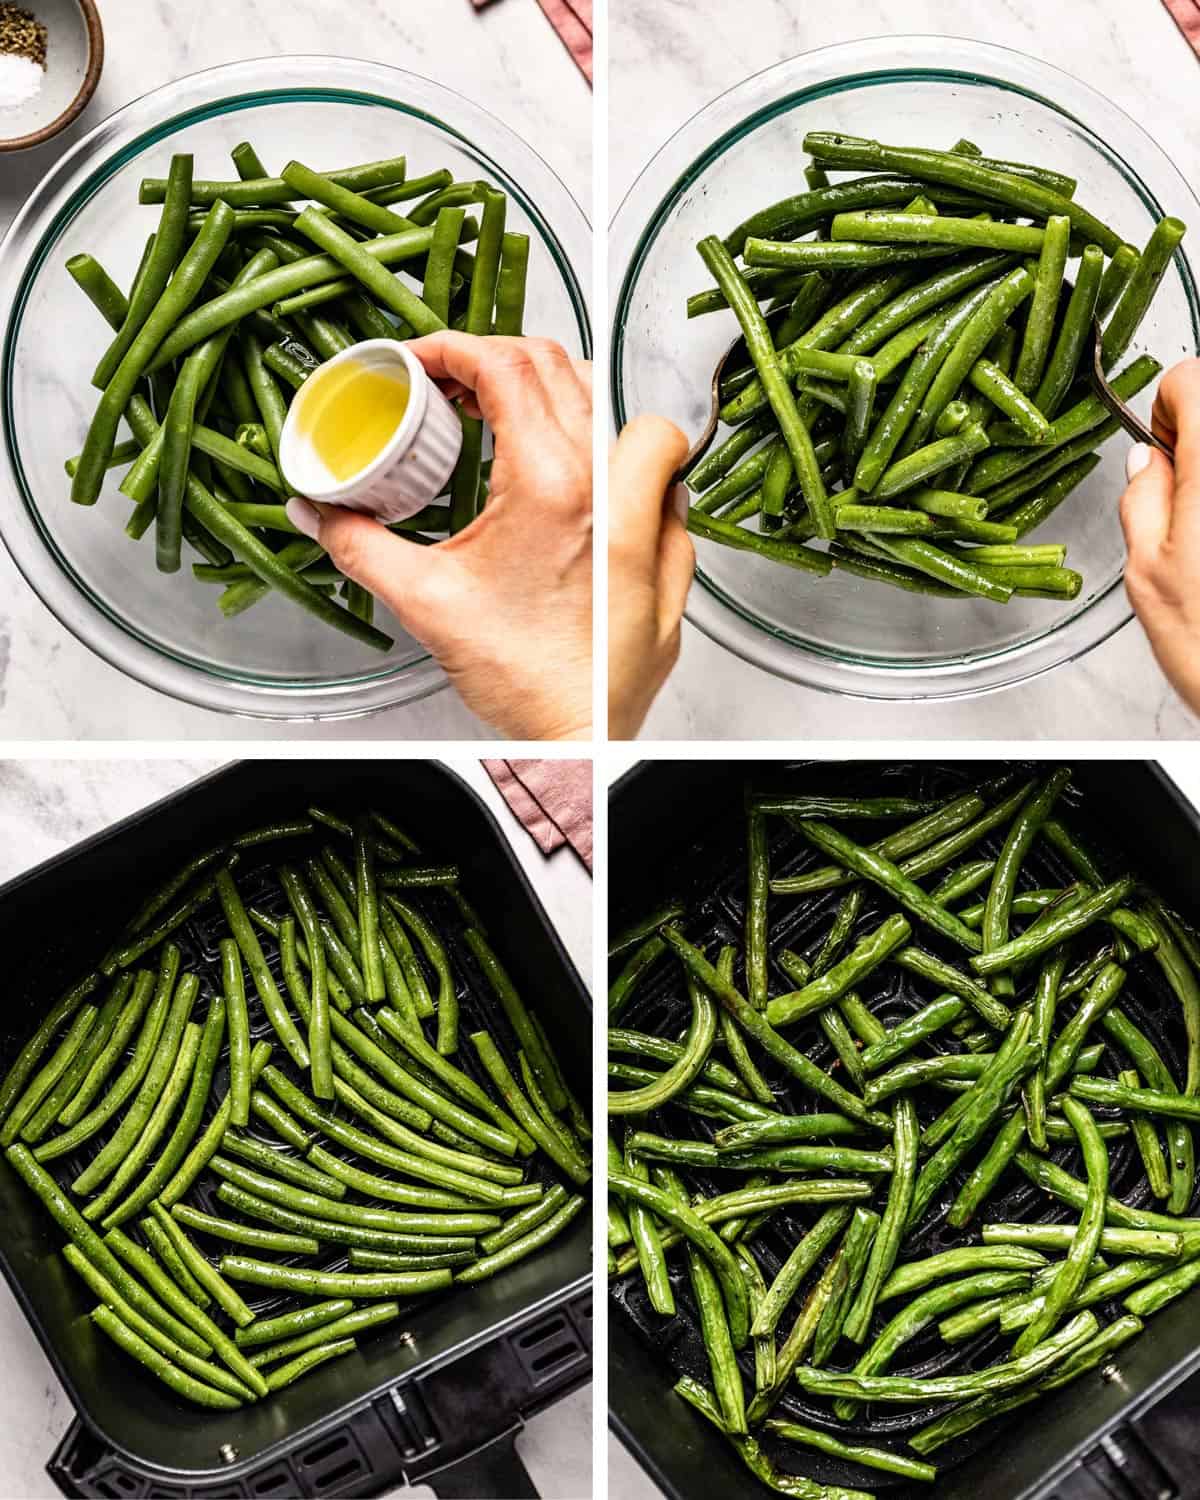 Four images showing how to air fry green beans